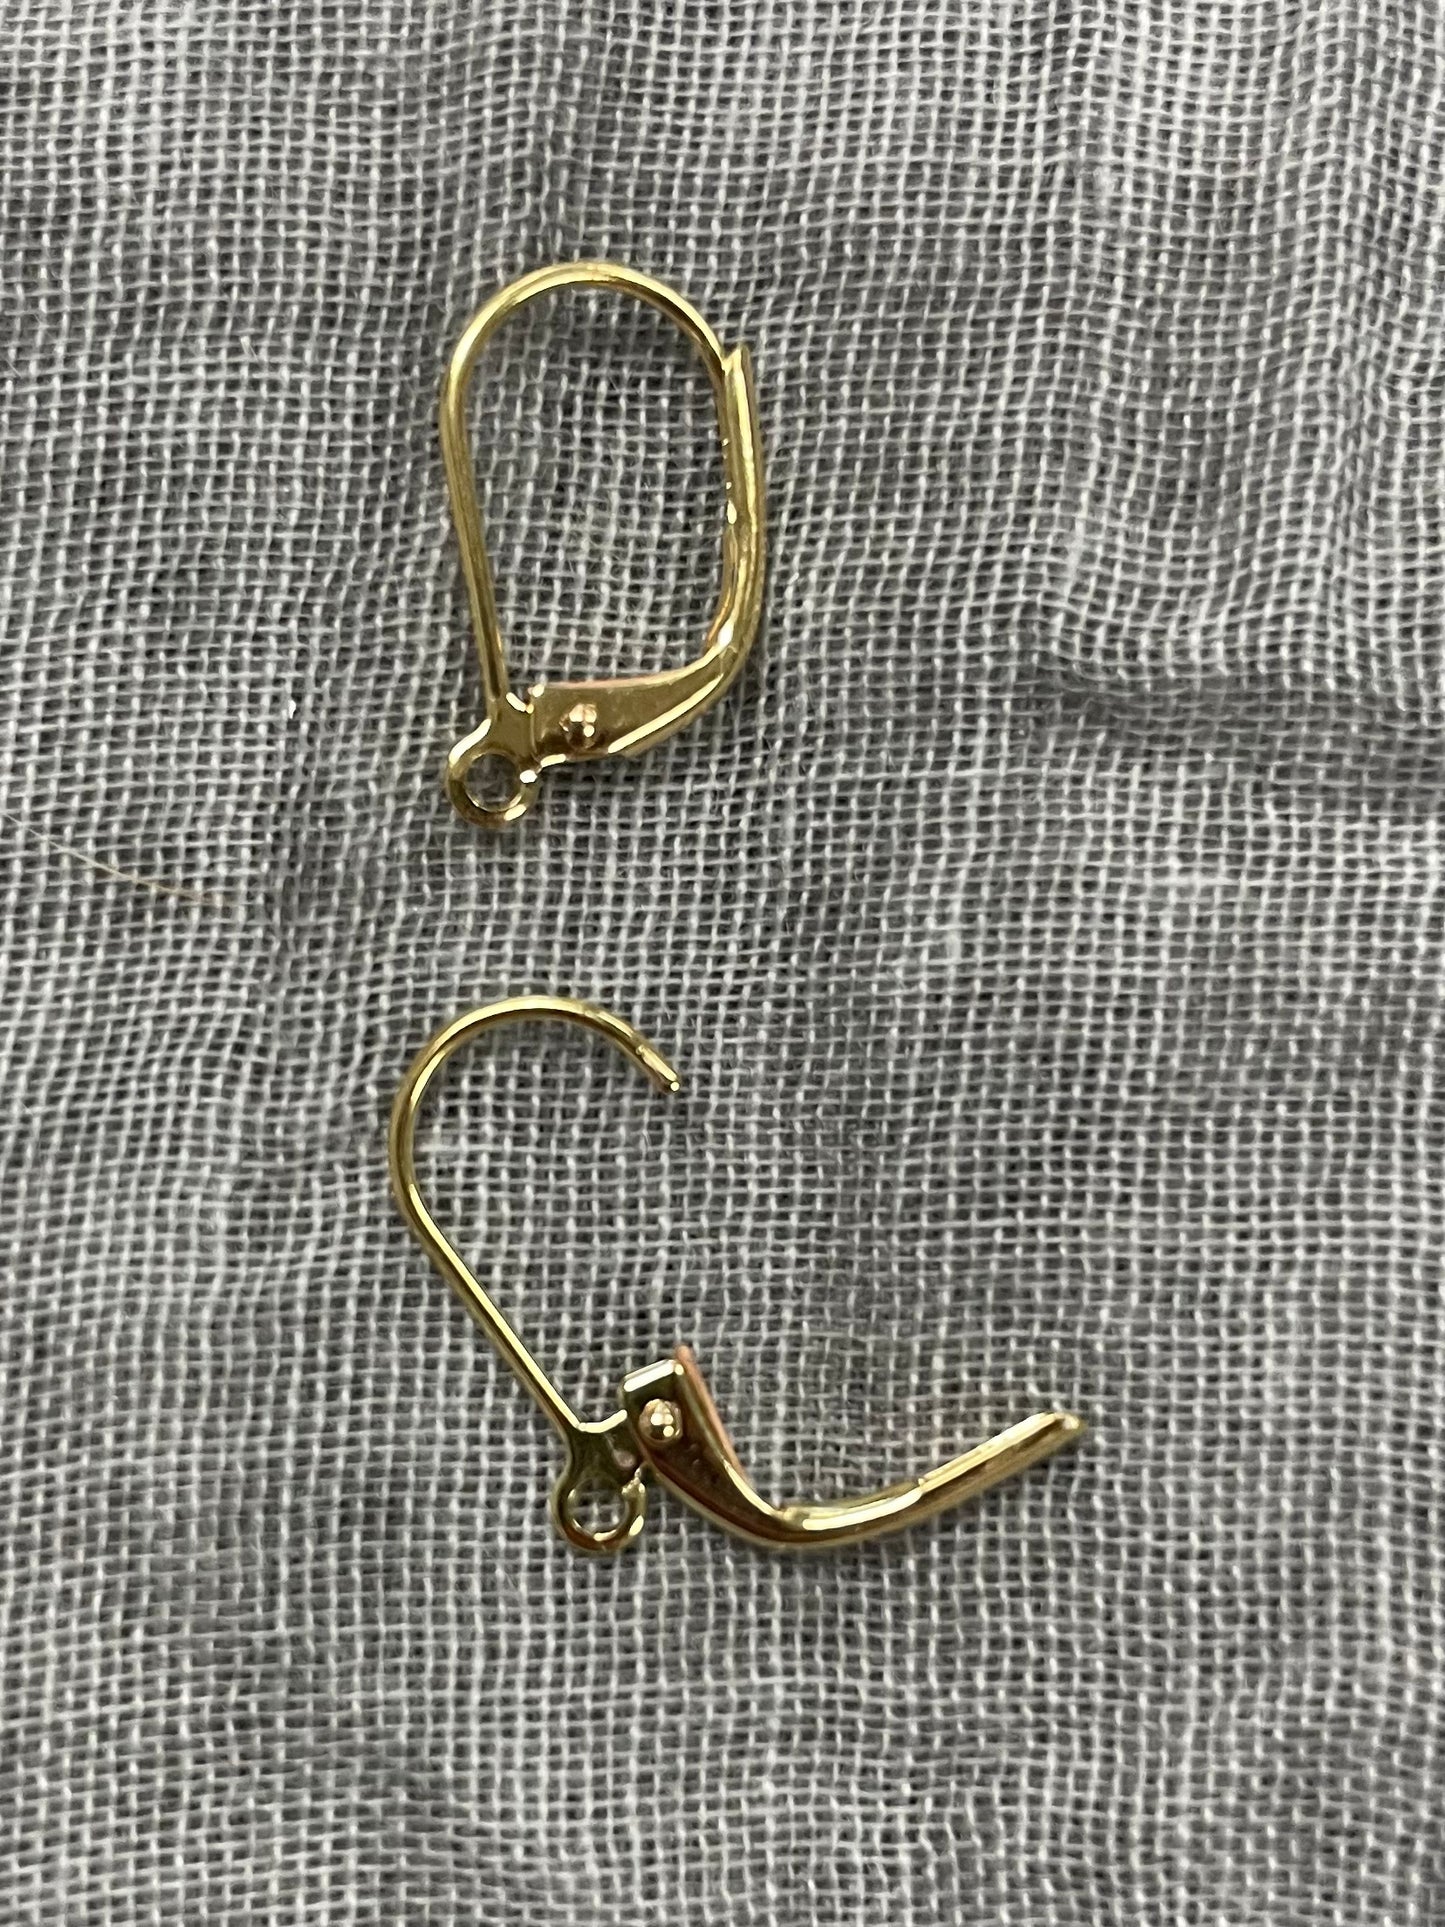 Gold Plate Leverback Earring With Open Loops 12.5x15 mm, 6 Pairs